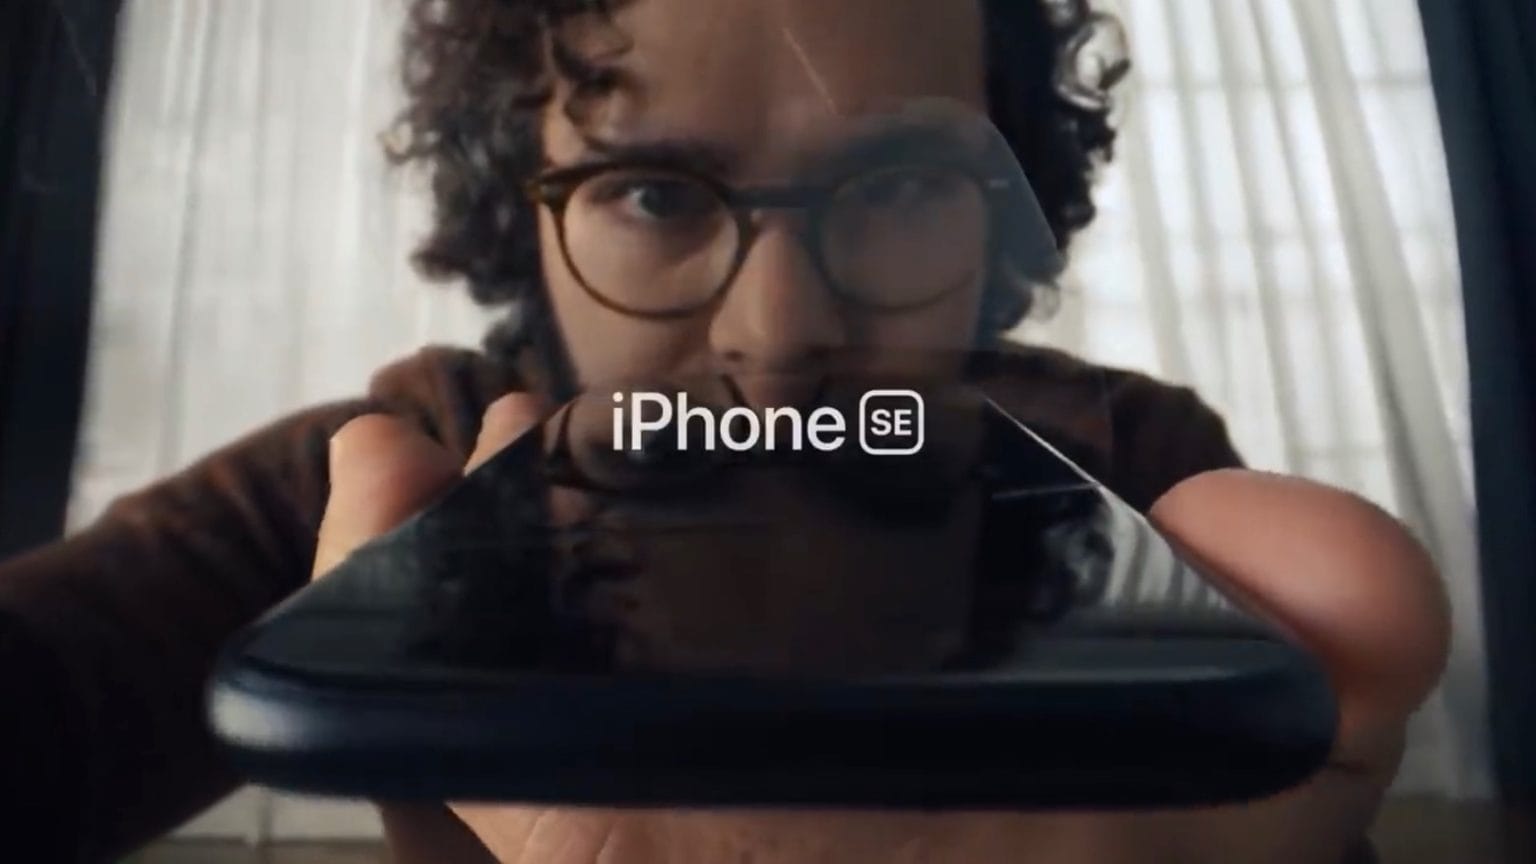 Apple “The Opening” online ad for 2020 iPhone SE